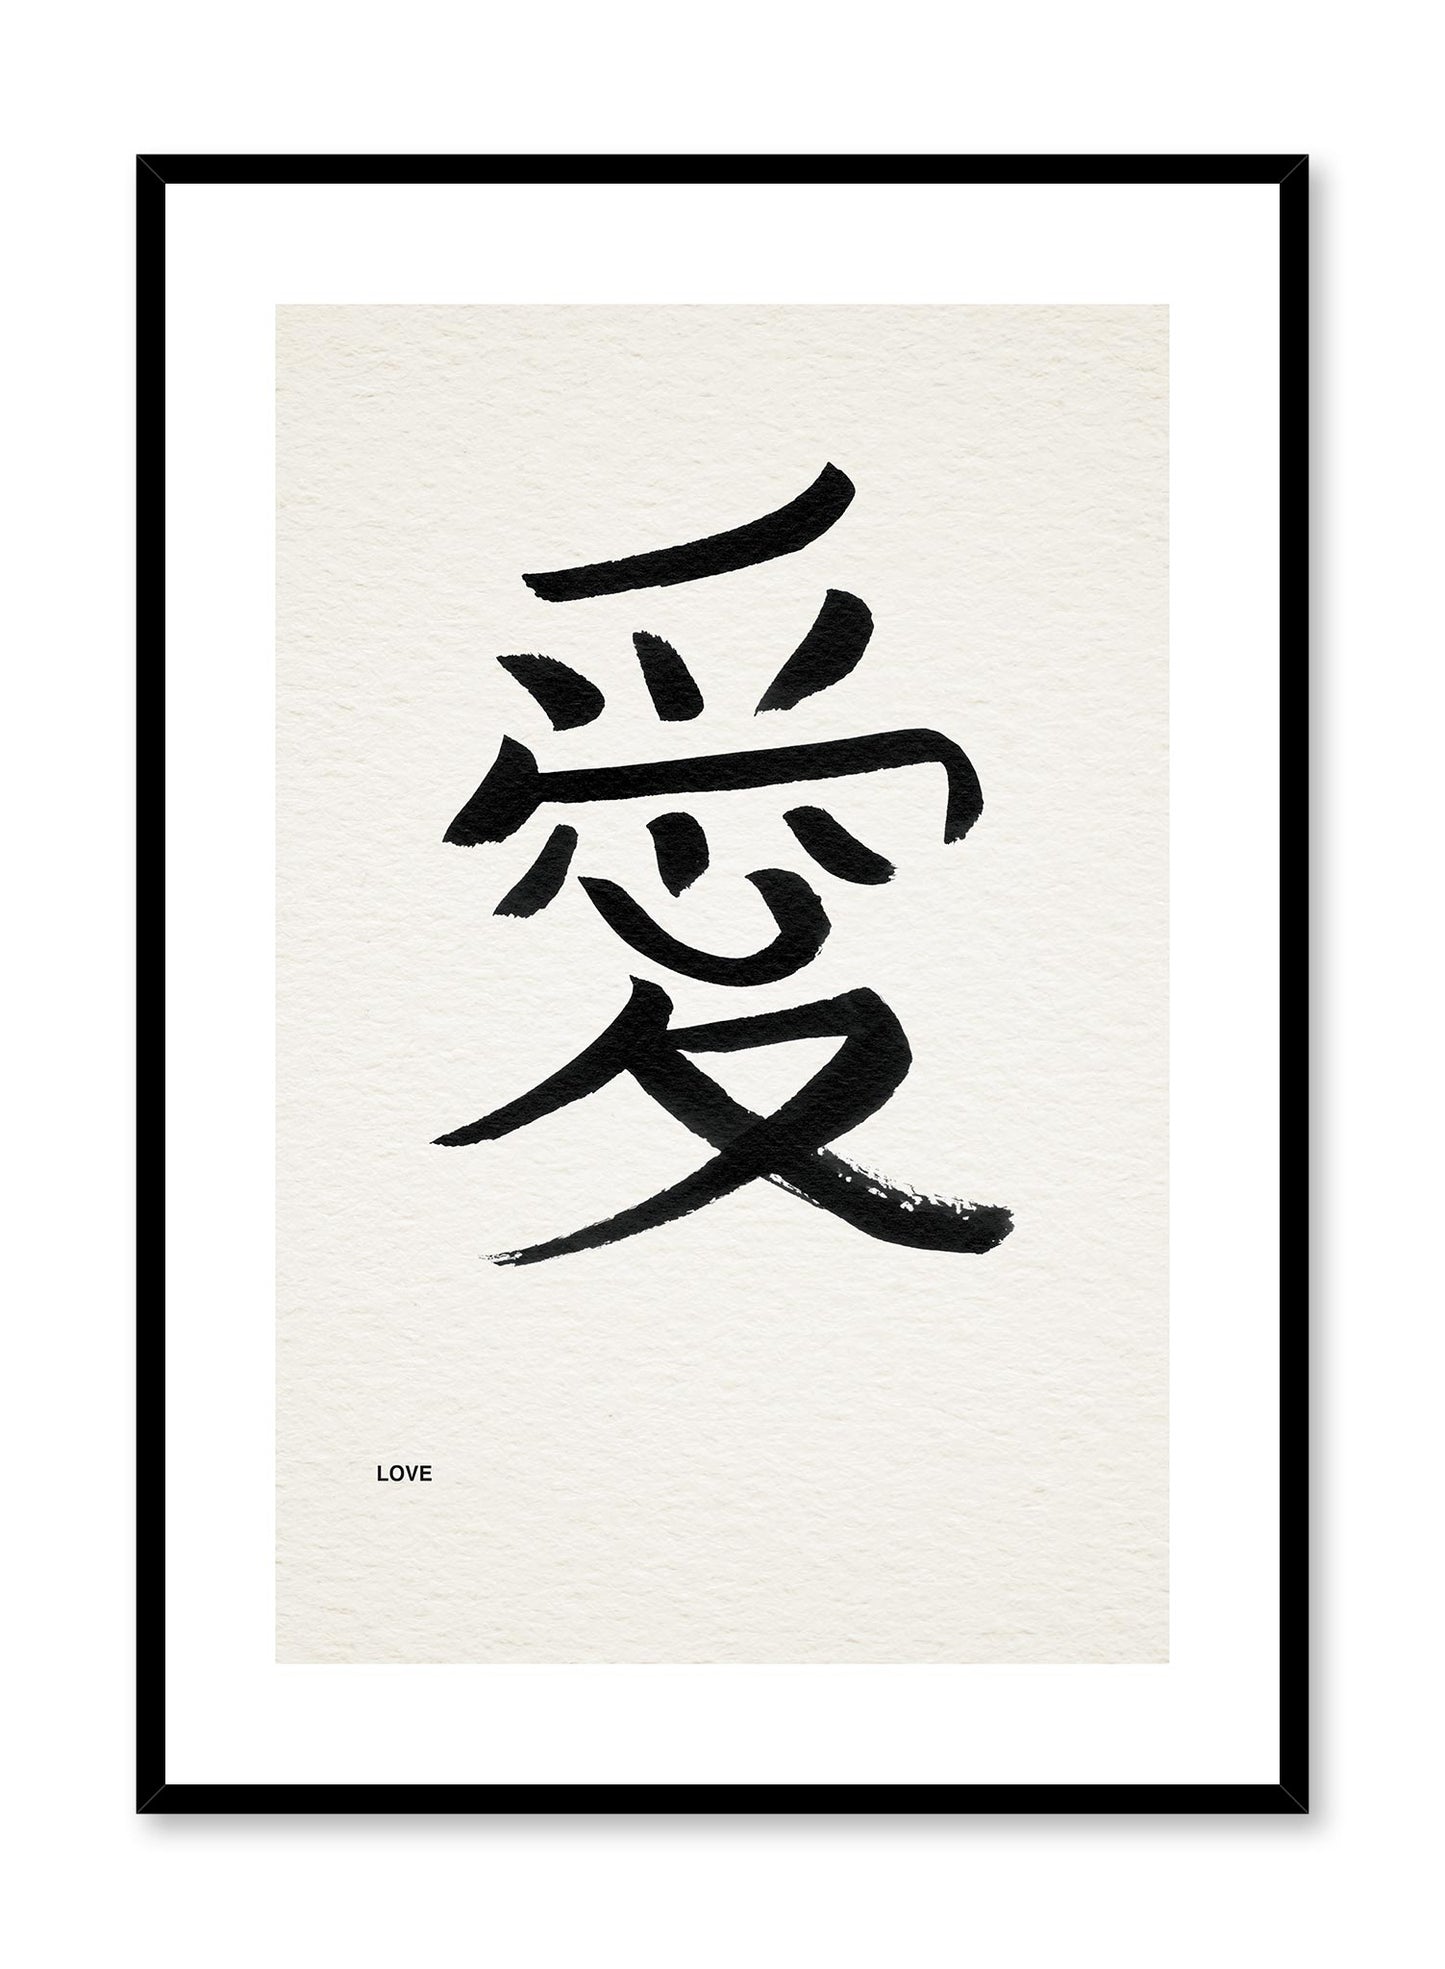 Love in Japanese is a minimalist typography by Opposite Wall of the Japanese word "Love" written in ink. 